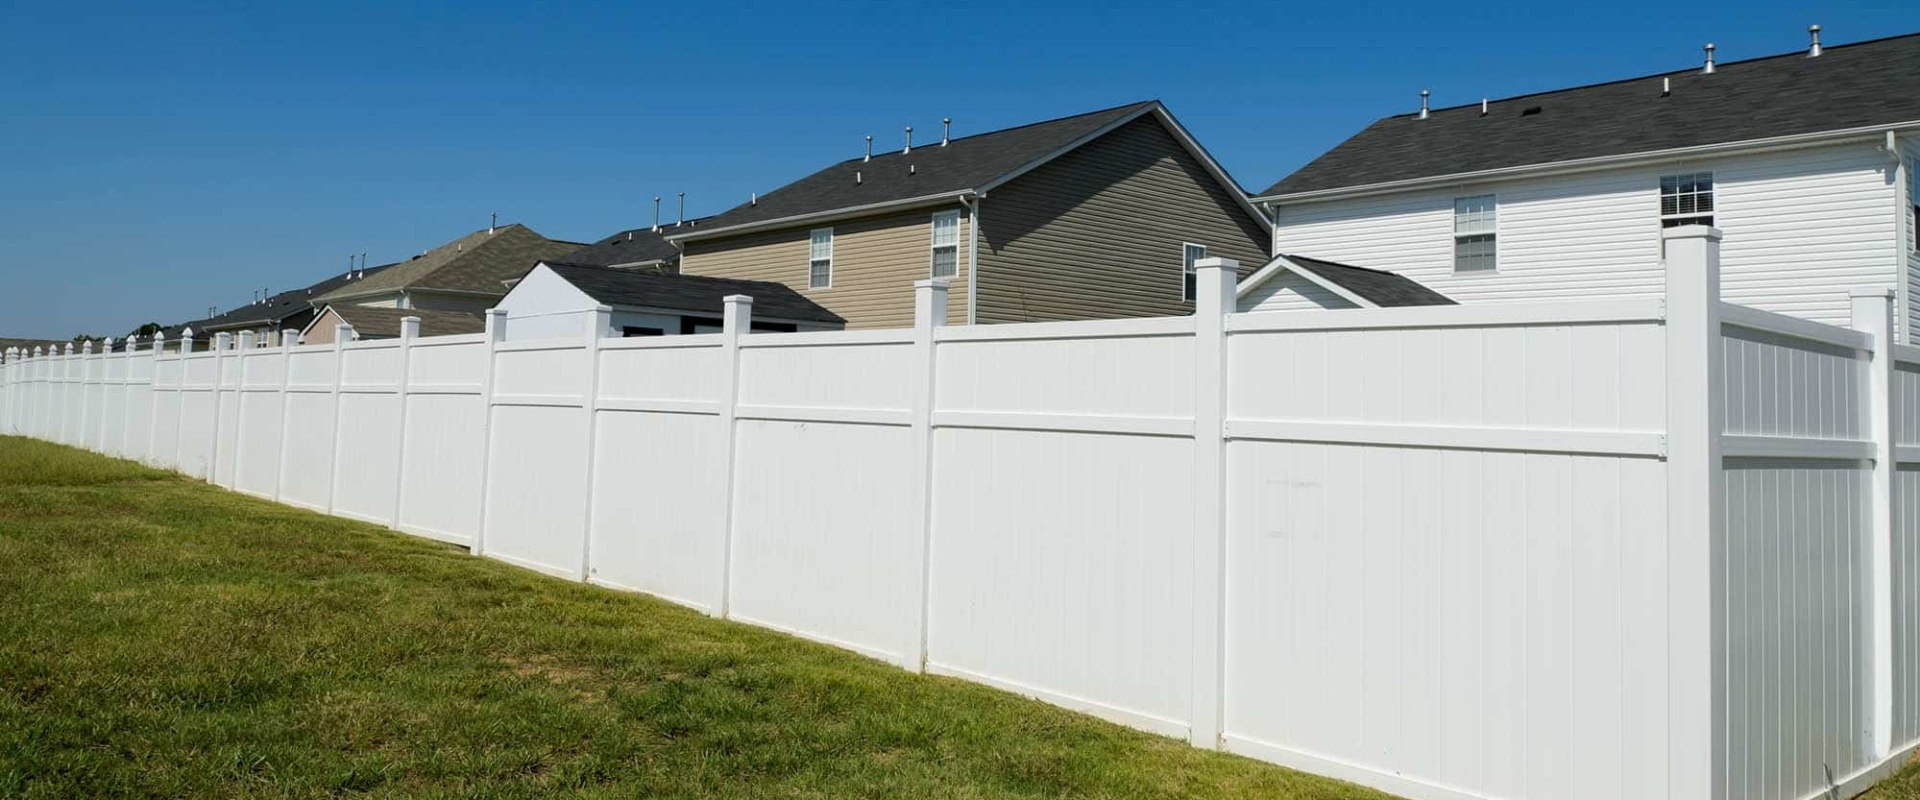 10 Reasons Why PVC Fences Made from Recycled Plastic are the Best Choice